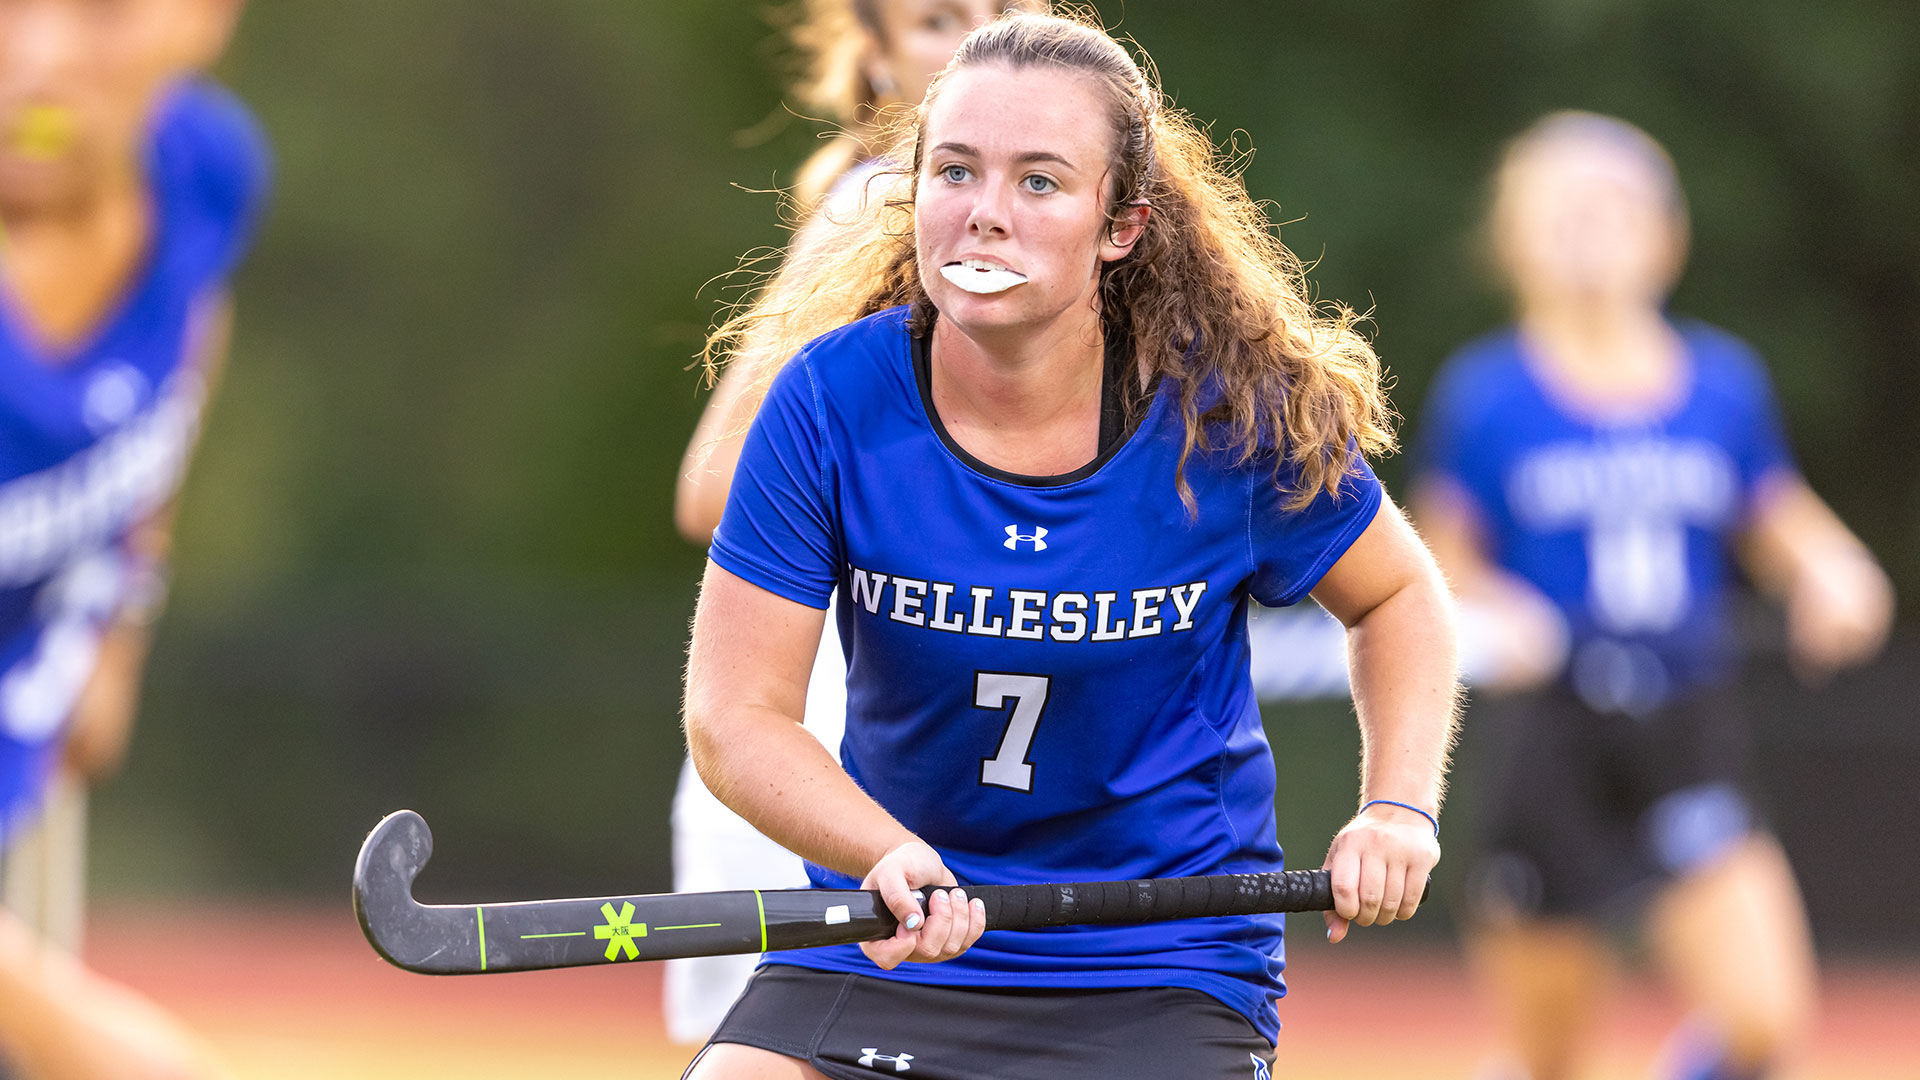 field hockey player with stick in Blue Wellesley jersey